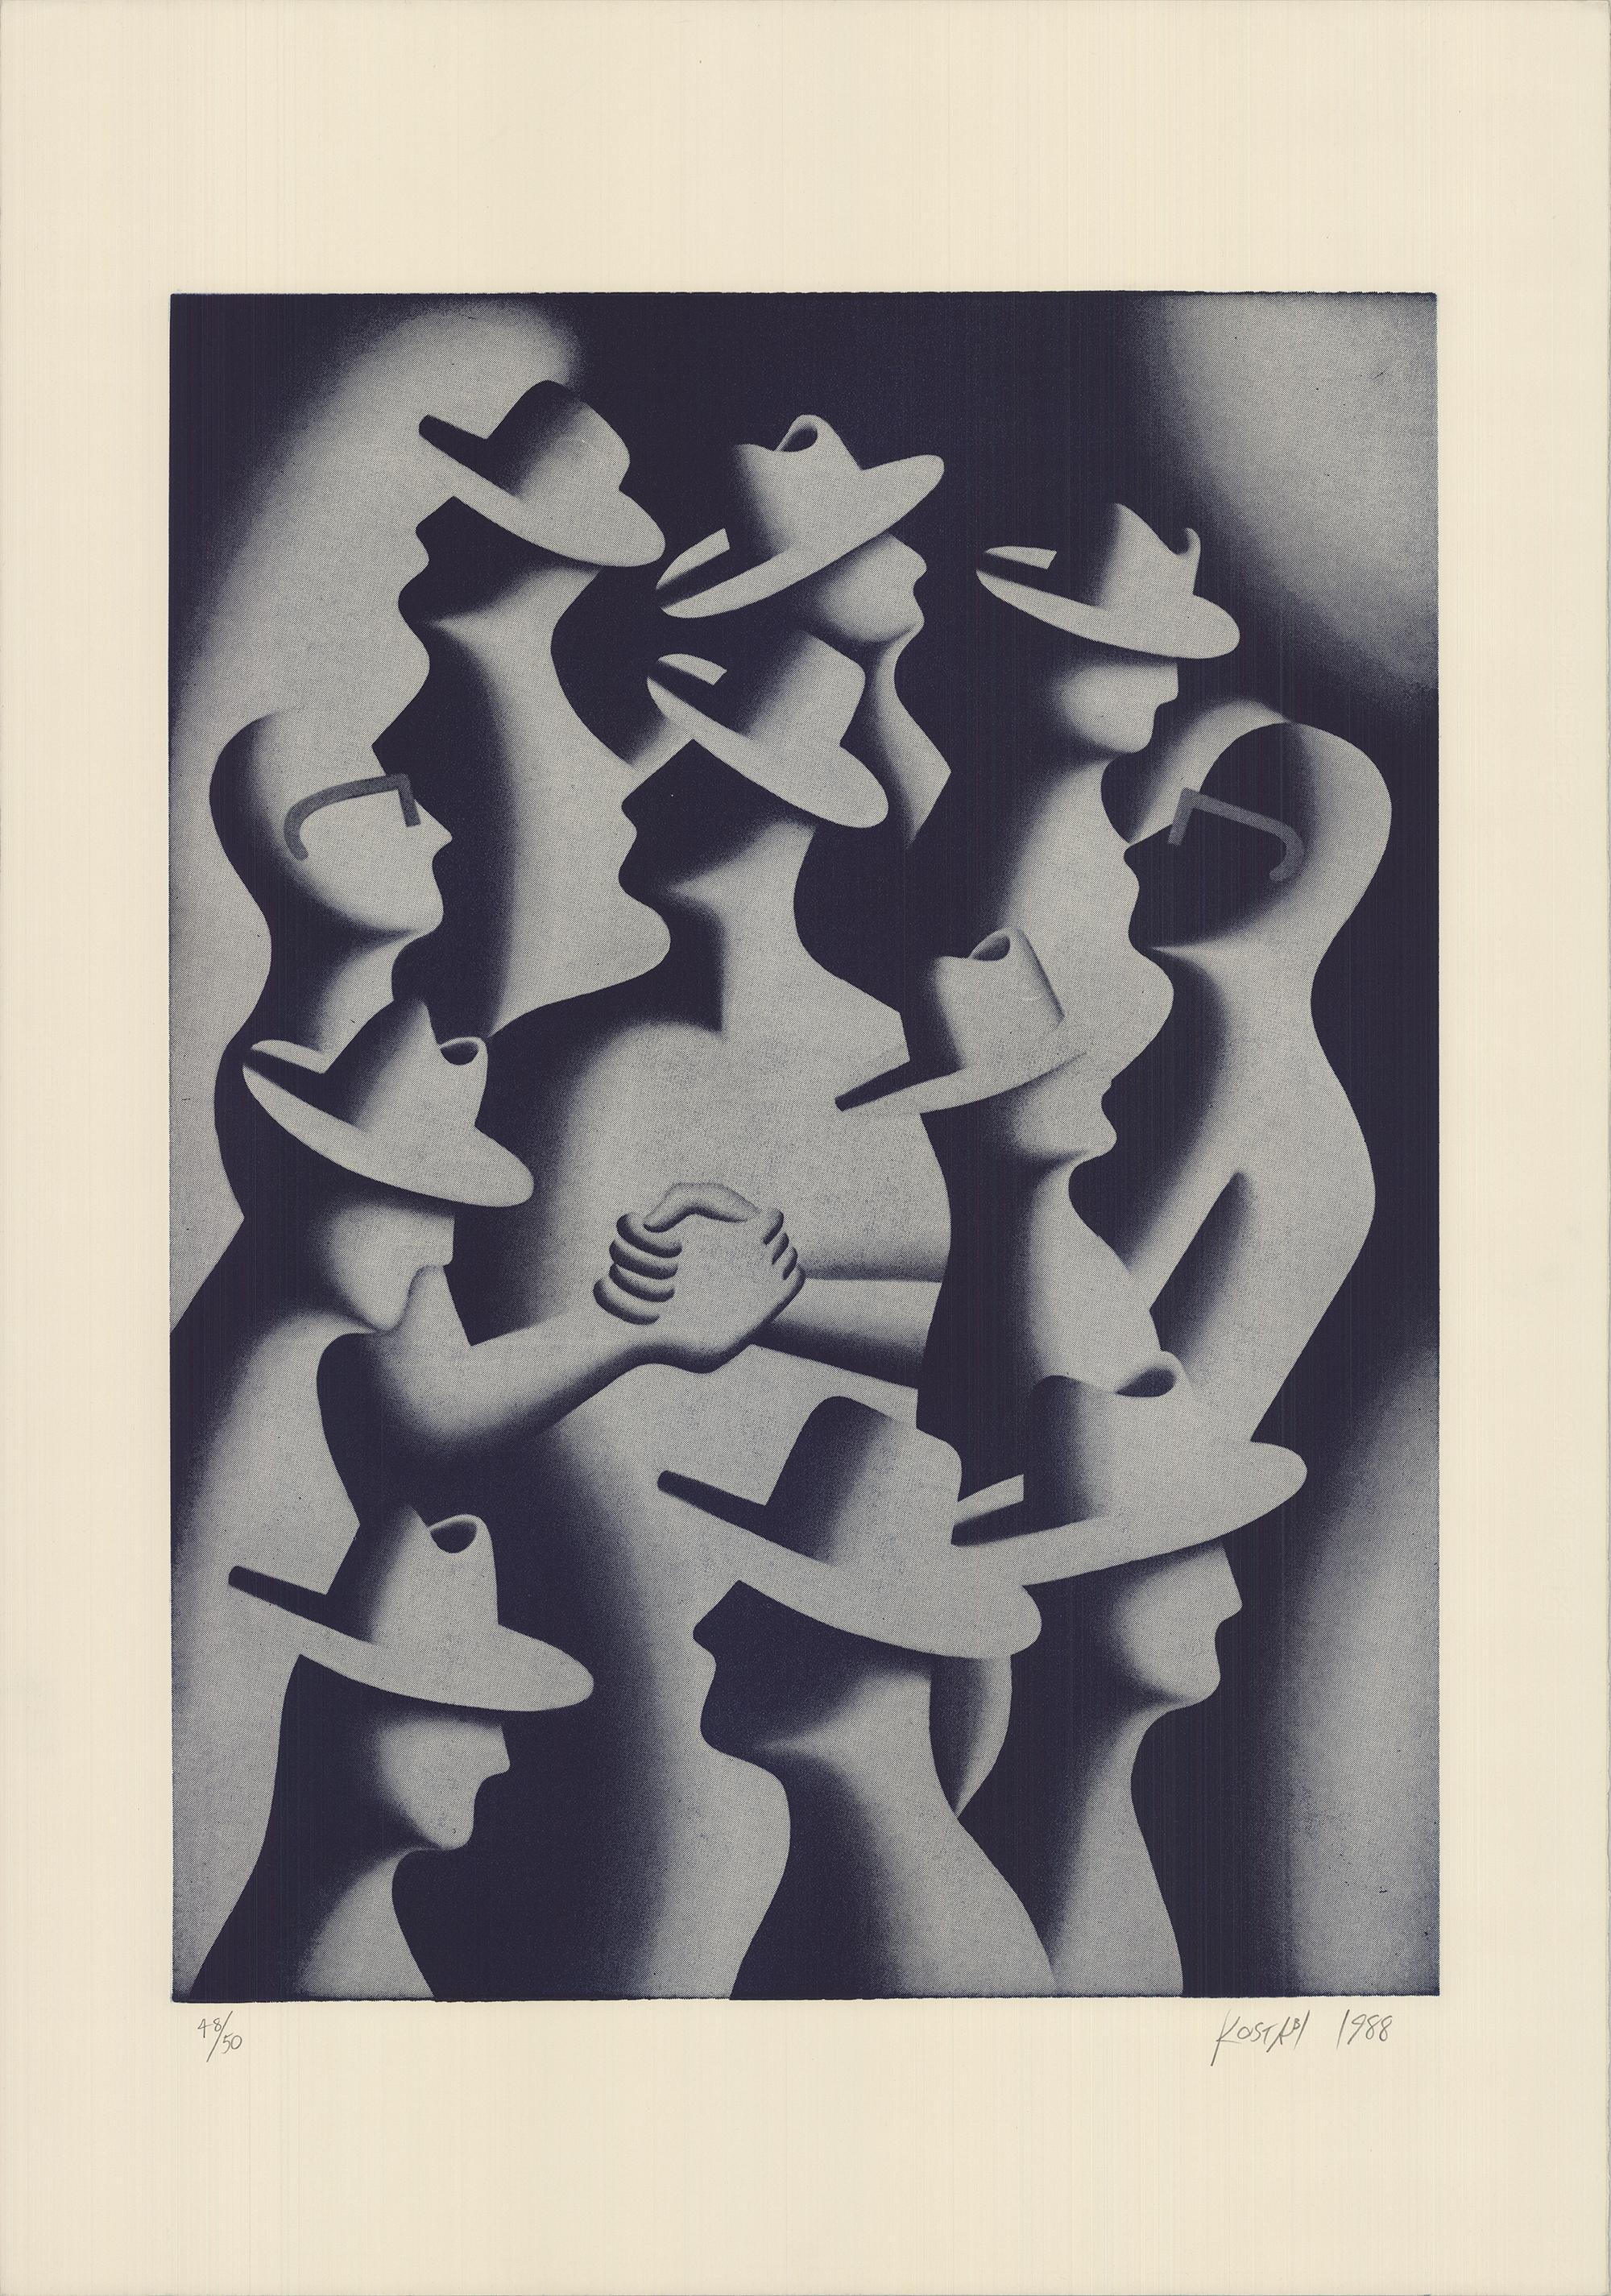 Merger and Acquisitions, 1988  - Print by Mark Kostabi